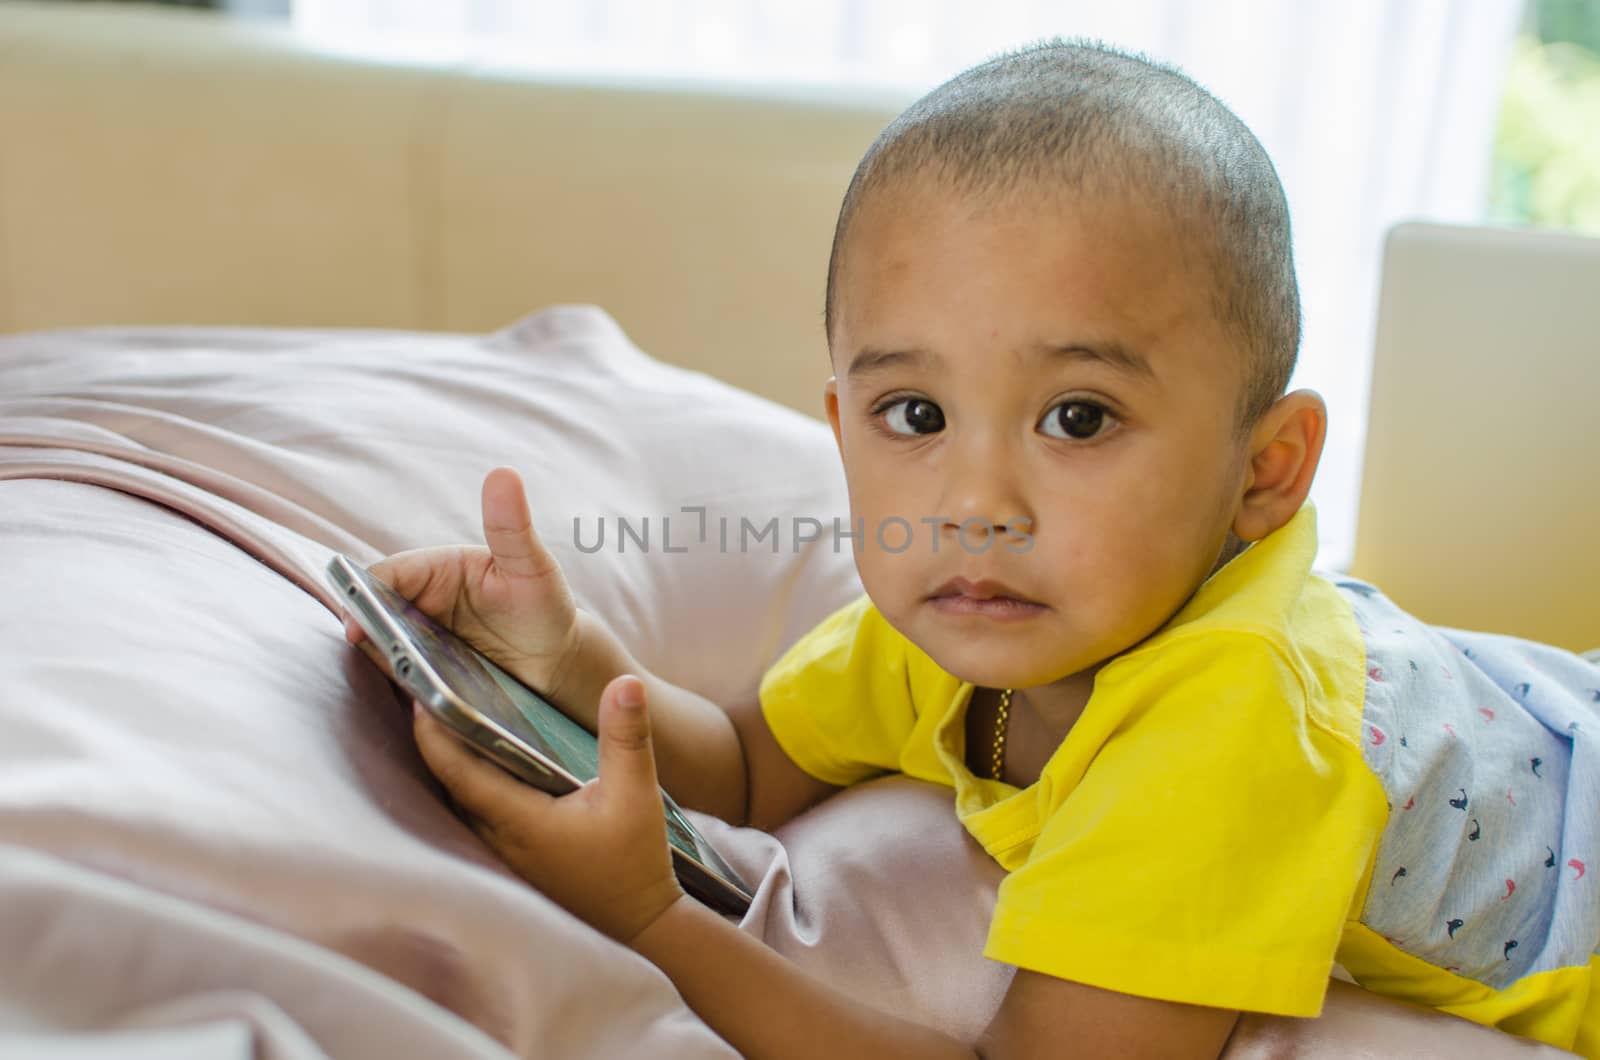 Boys play Smart phone on the bed.